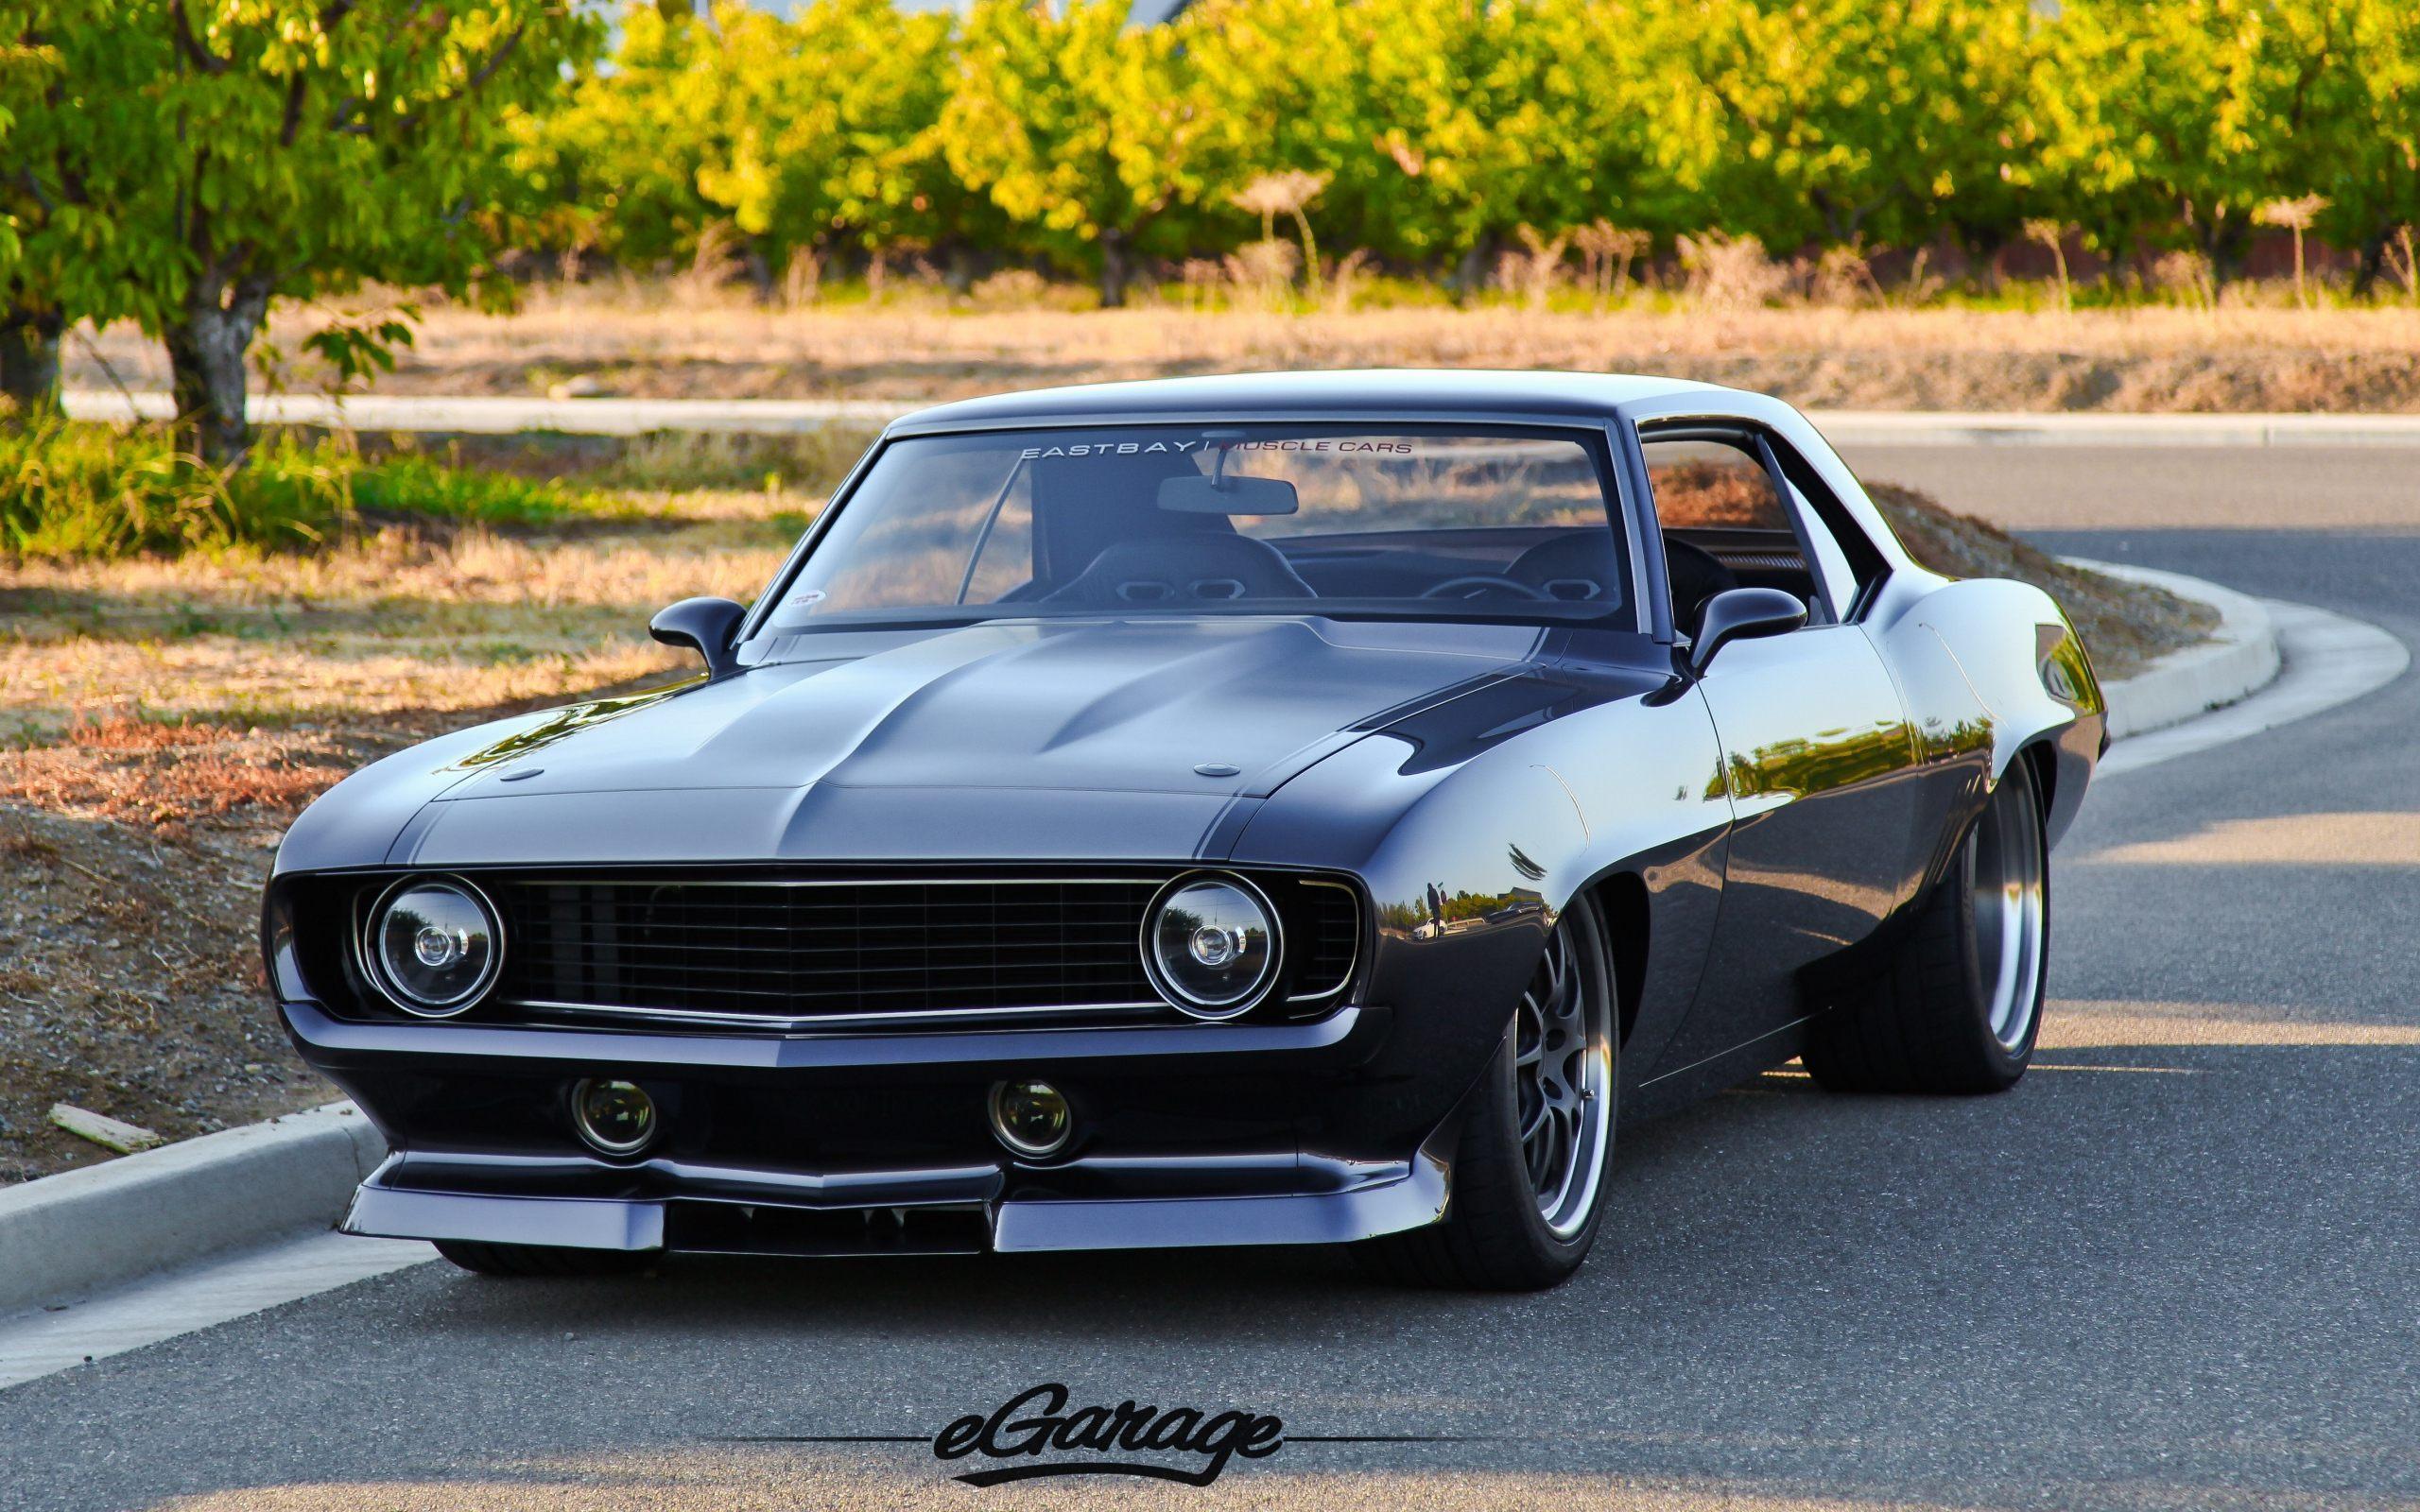 American Muscle Car Wallpaper for Android - APK Download